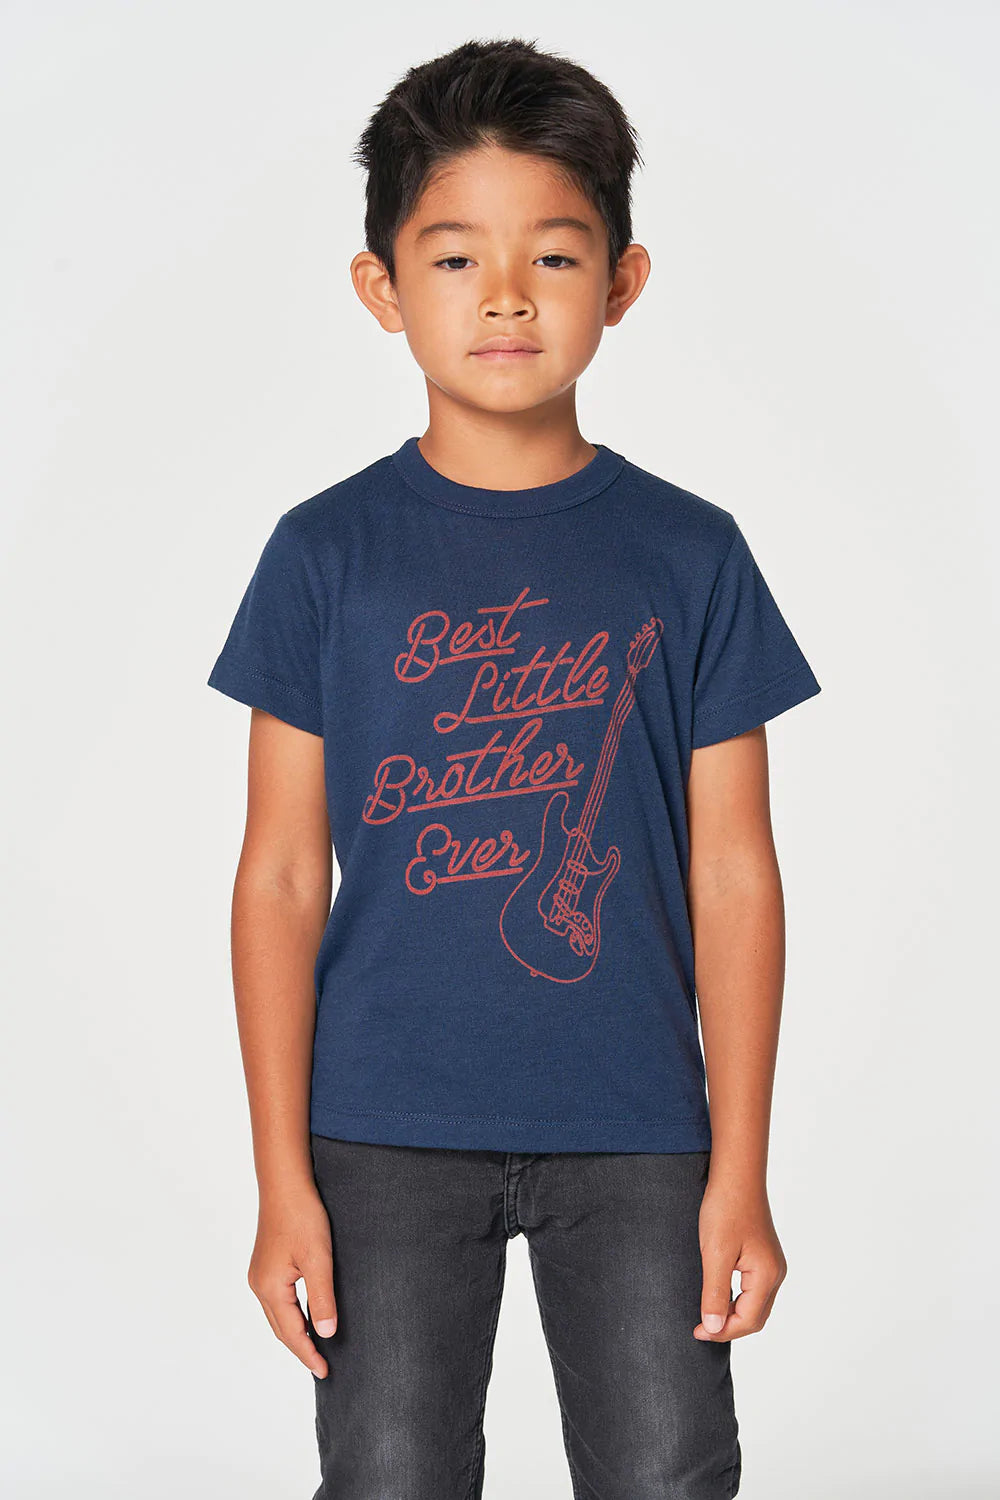 Chaser Kids Best Little Brother Tee in Blue - FINAL SALE